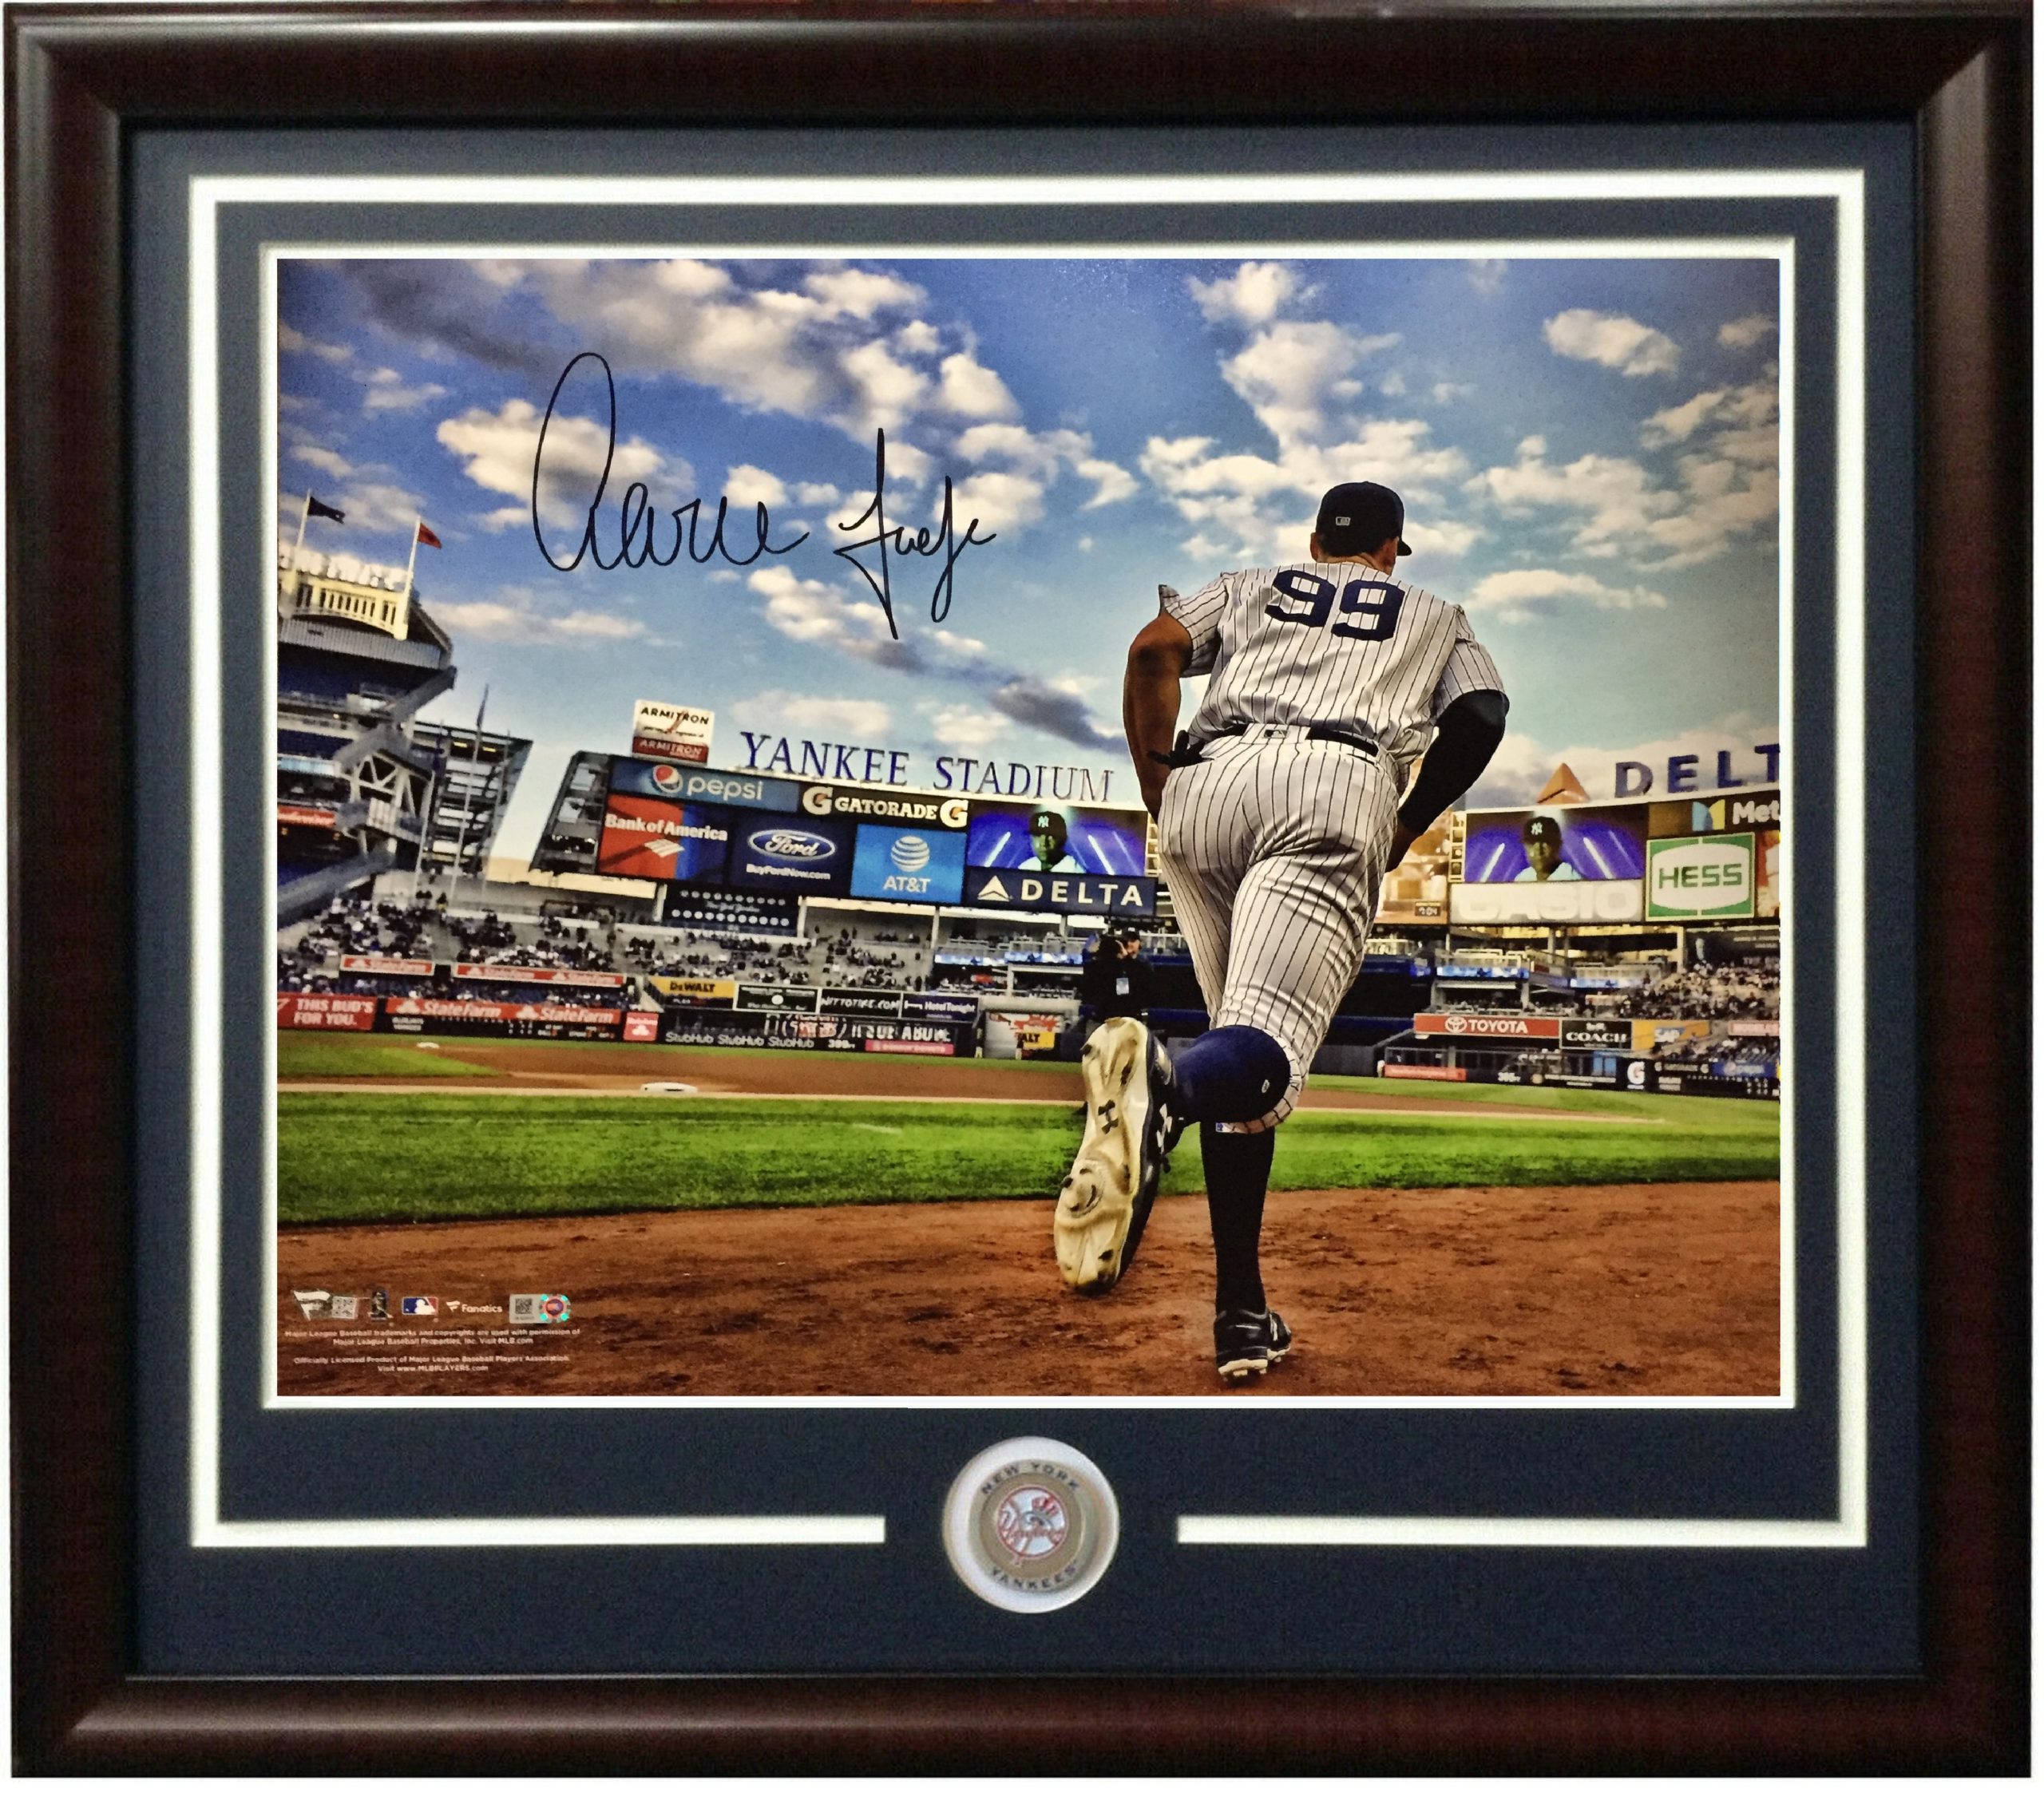 Aaron Judge Signed Custom Framed Authentic Yankees Jersey with Actual Video  Display Monitor to Play Highlights (Fanatics)